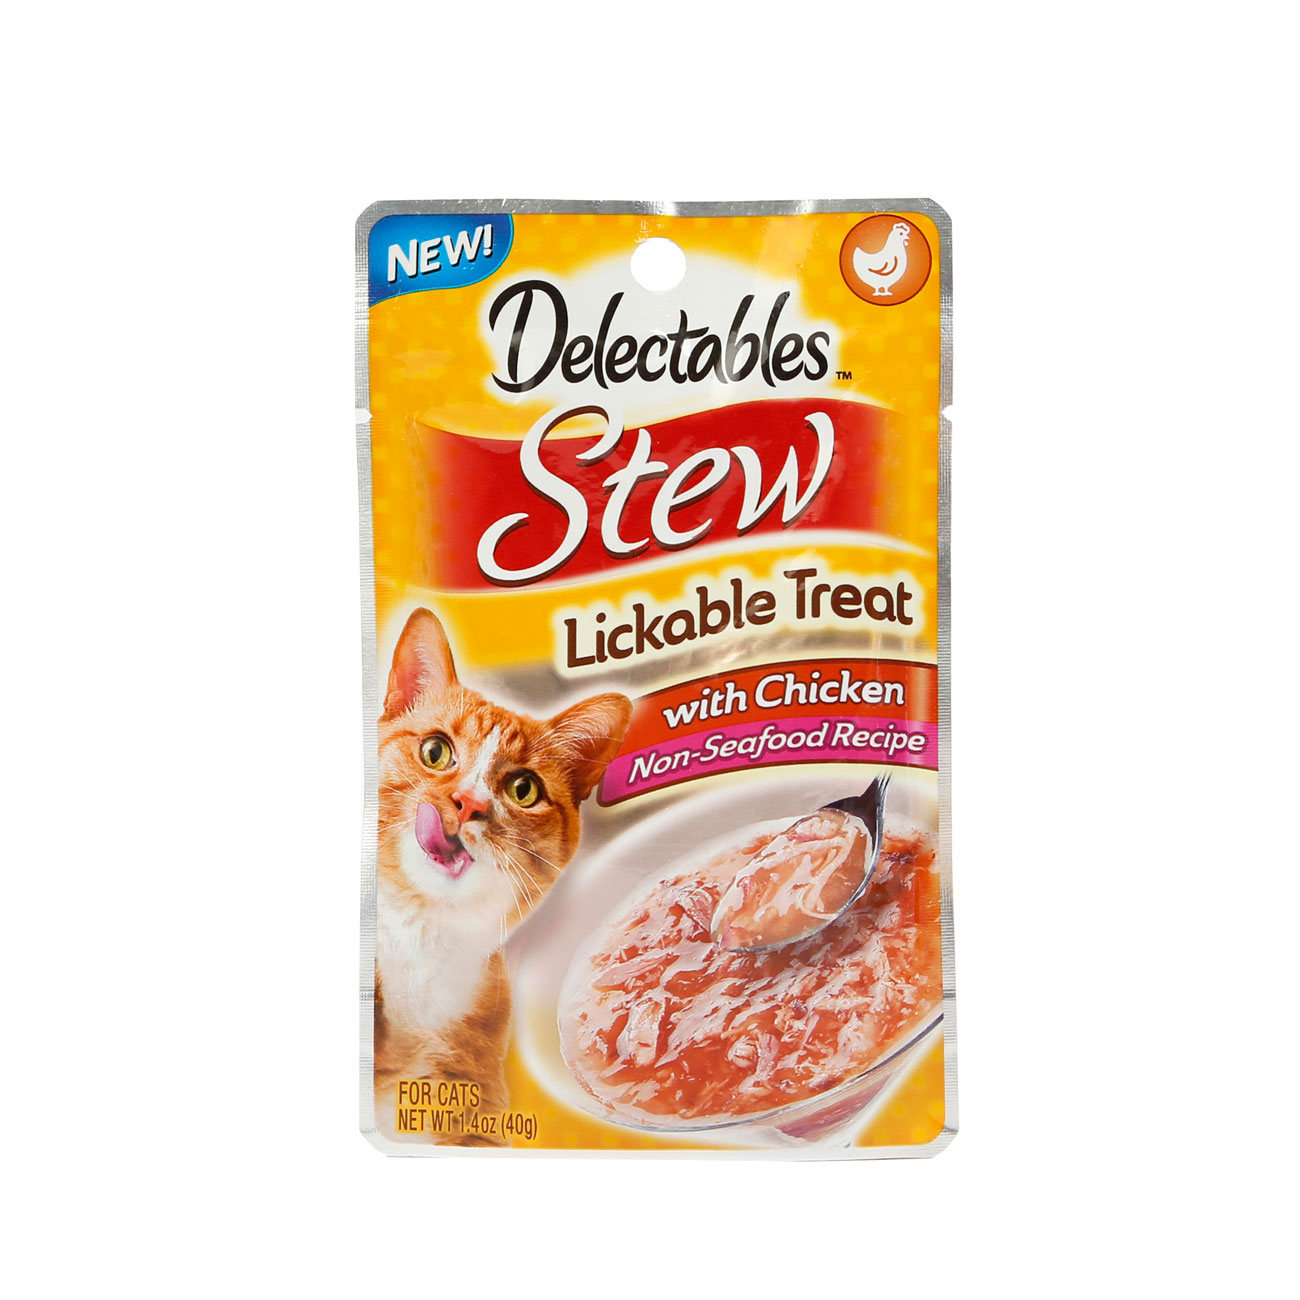 Delectables™ Lickable Treat Stew with Chicken NonSeafood Recipe Hartz